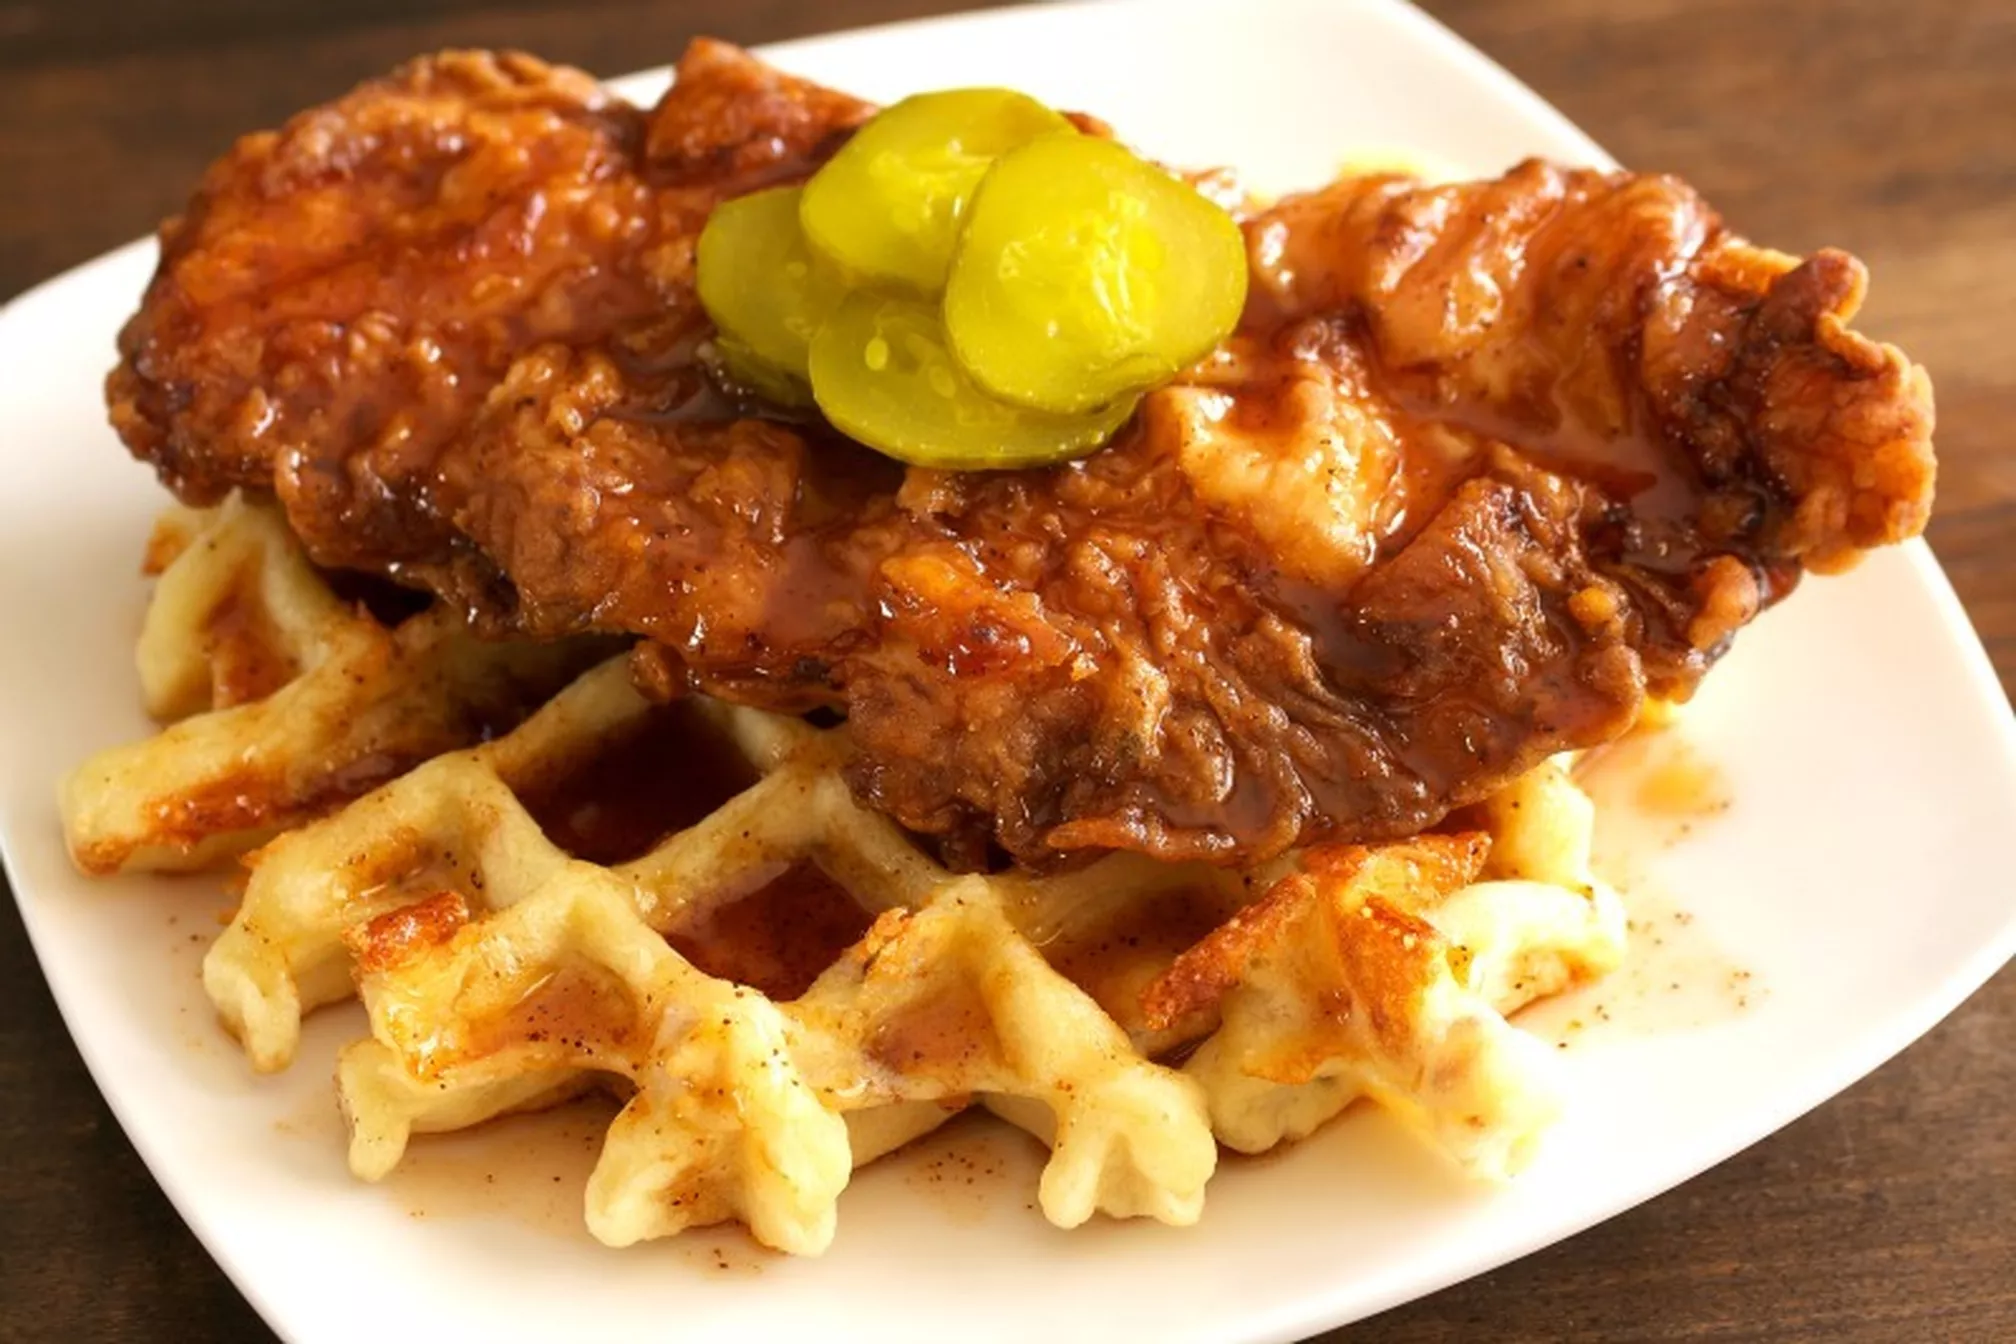 Best Chicken And Waffles Recipe How To Make Hot Chicken And Waffles